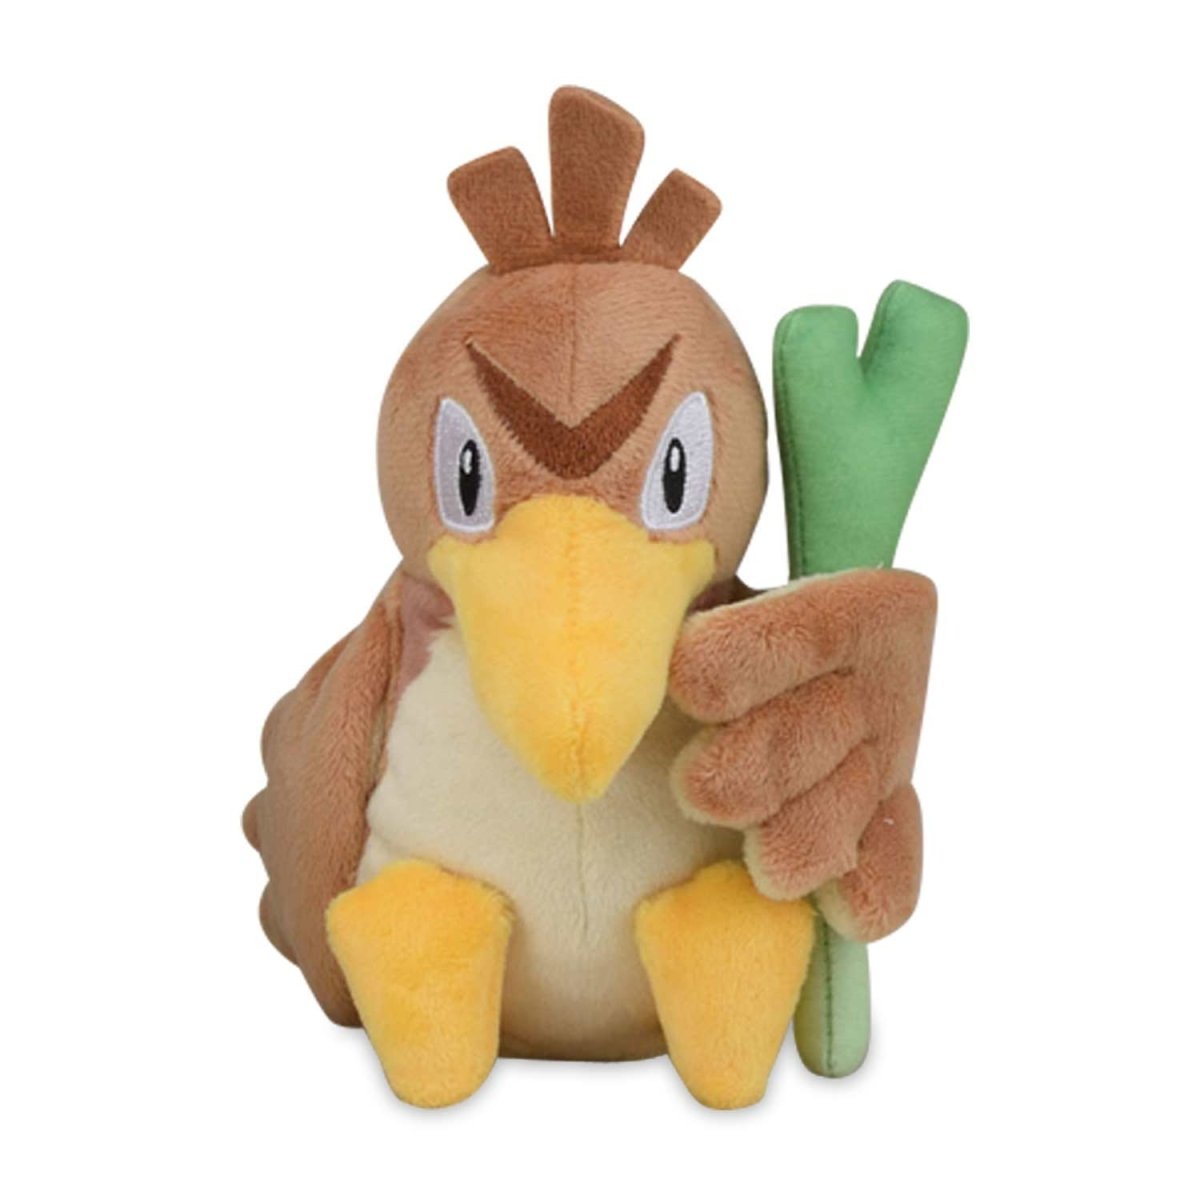 FARFETCH'D is like a SECOND RESTRICTED 